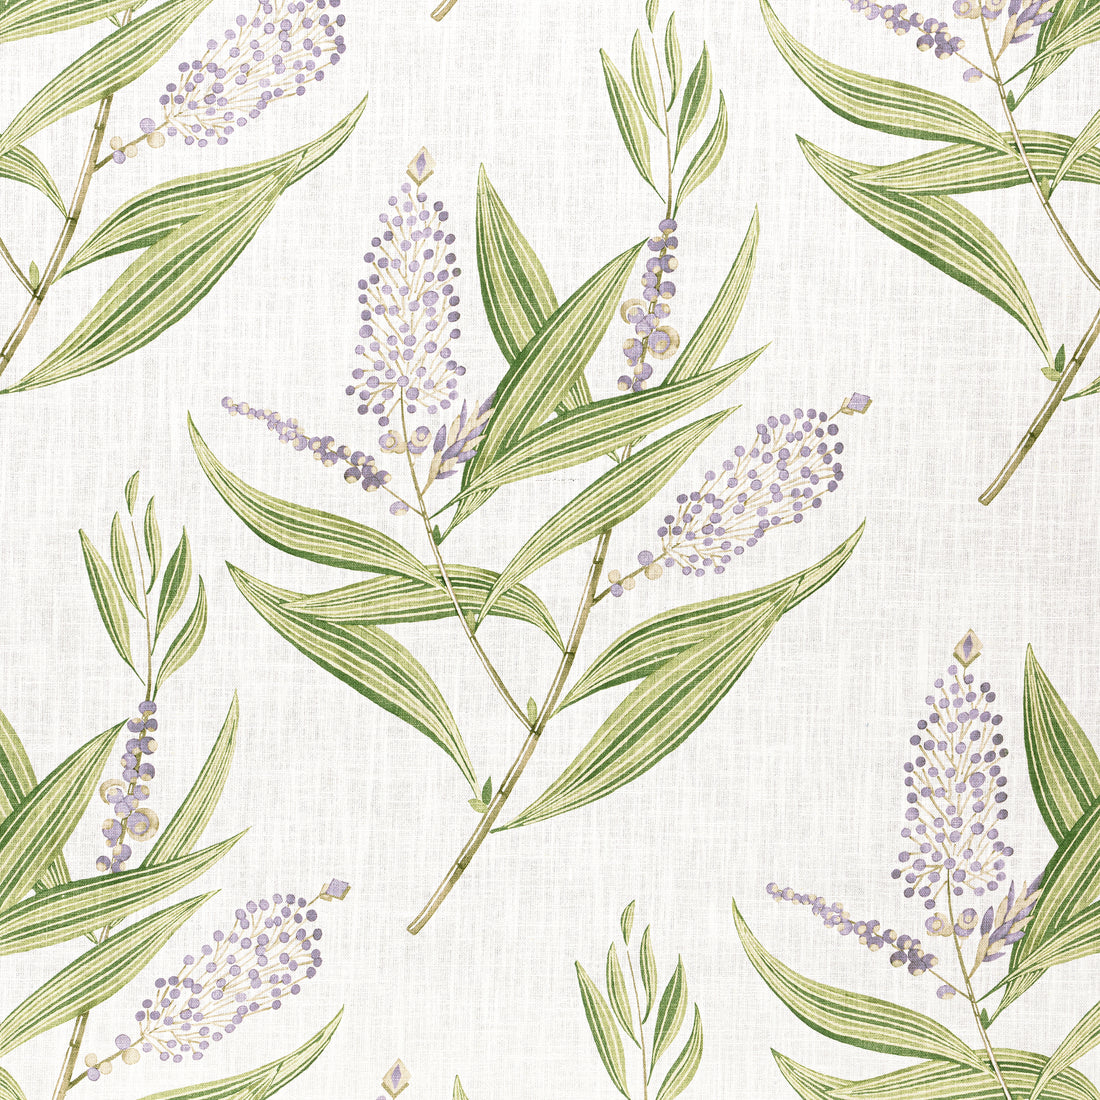 Winter Bud fabric in lavender color - pattern number AF23134 - by Anna French in the Willow Tree collection